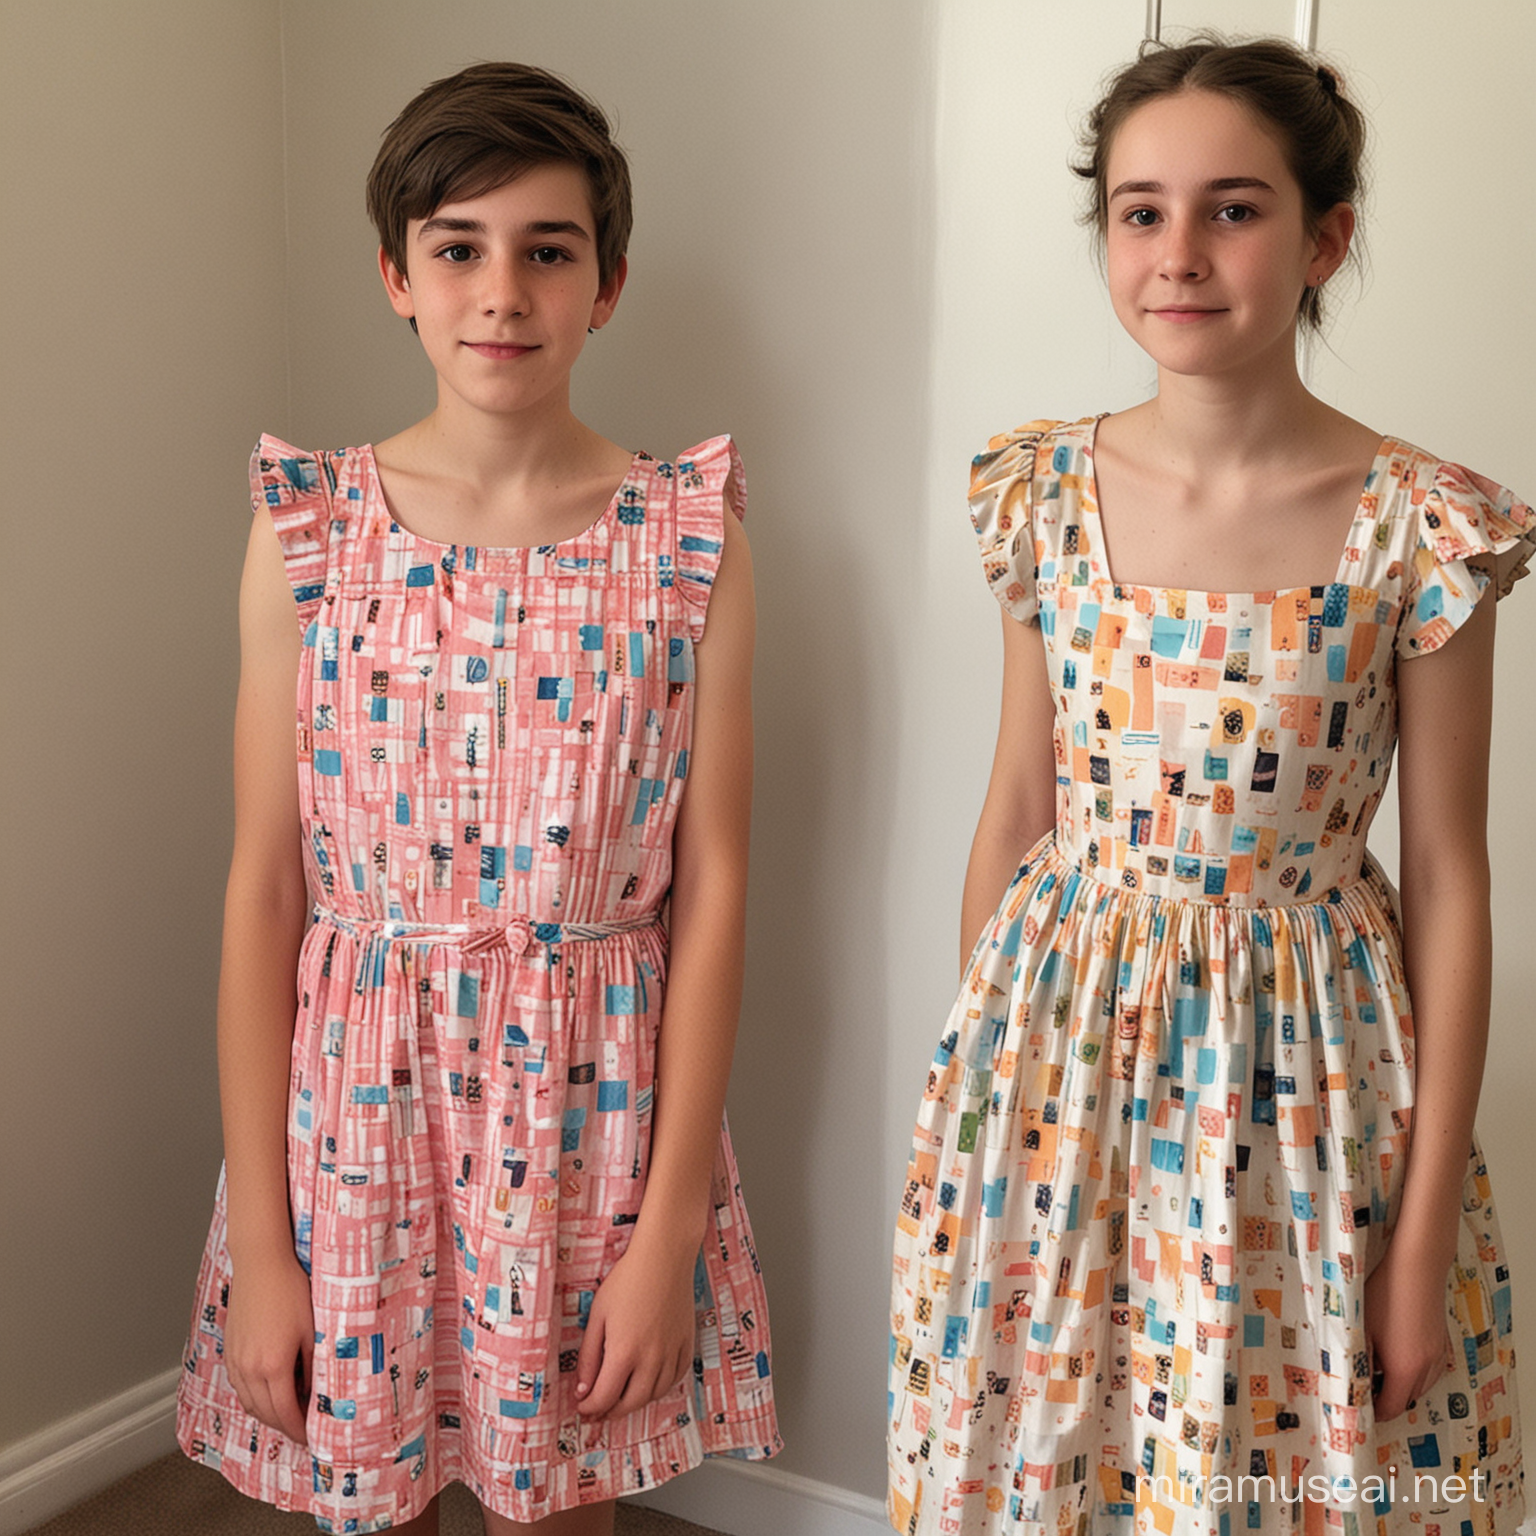 Teenage Boy Gifted a Dress for Sisters Birthday Celebration